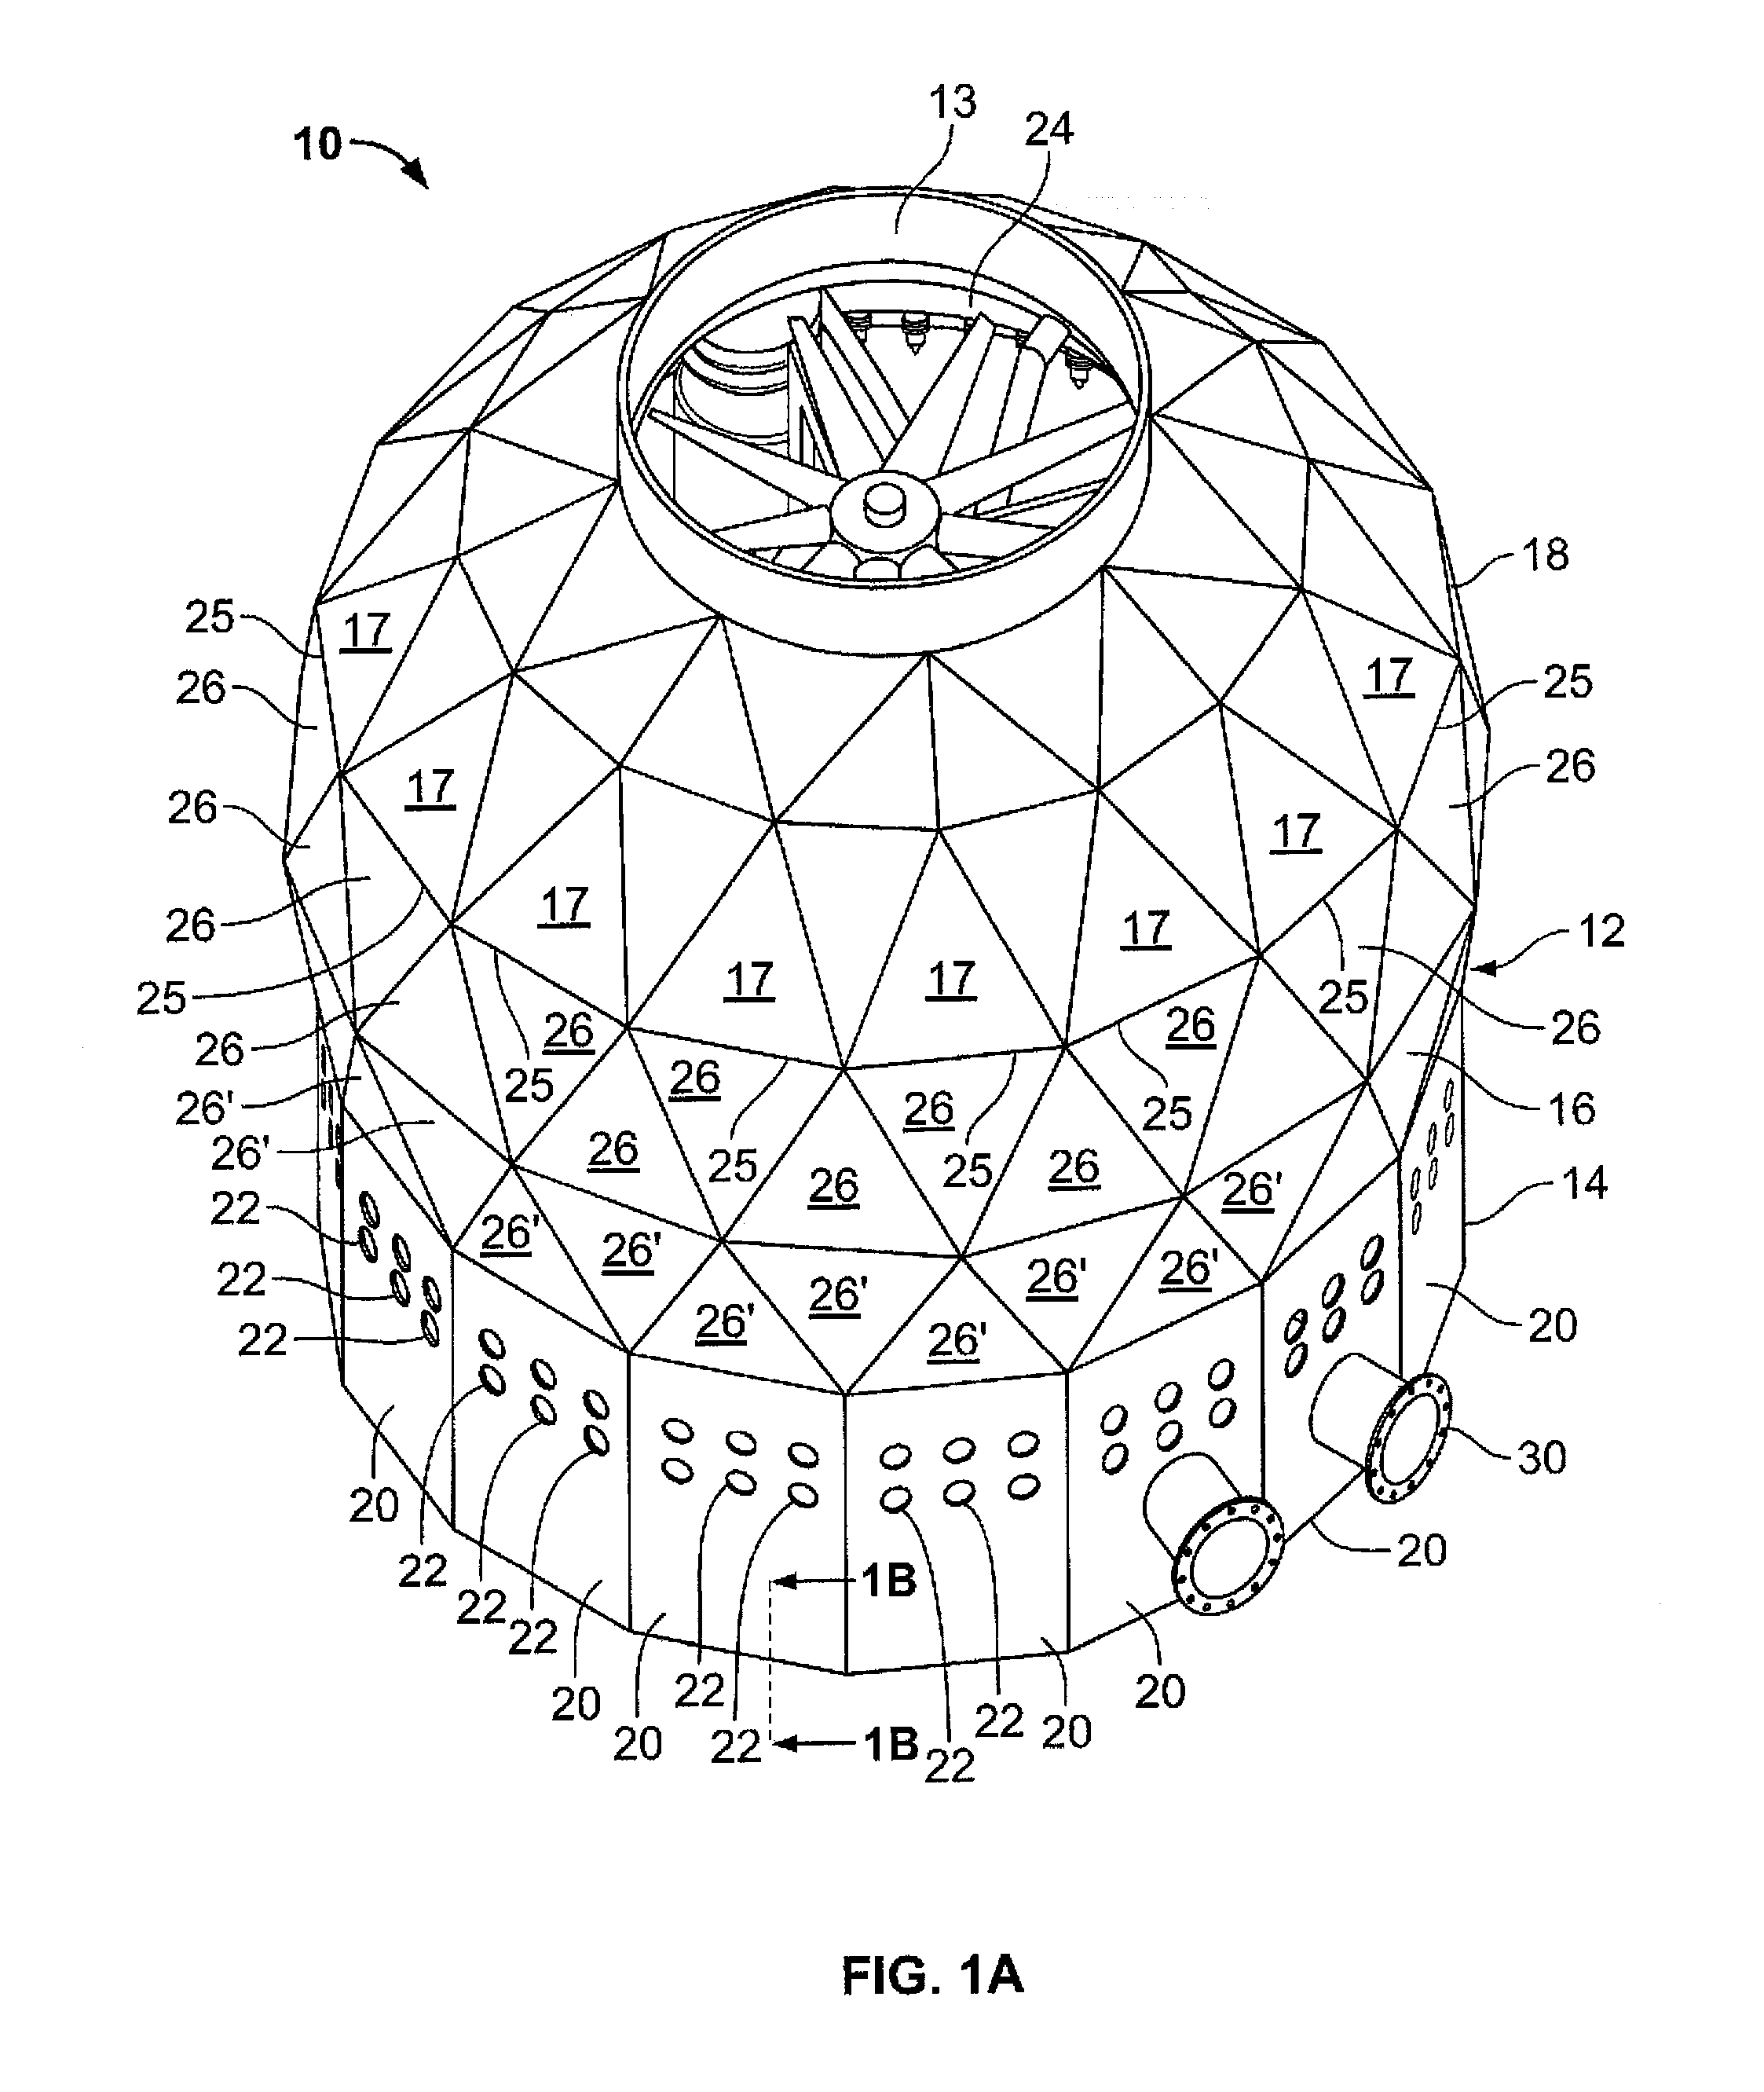 Cooling tower with geodesic shell